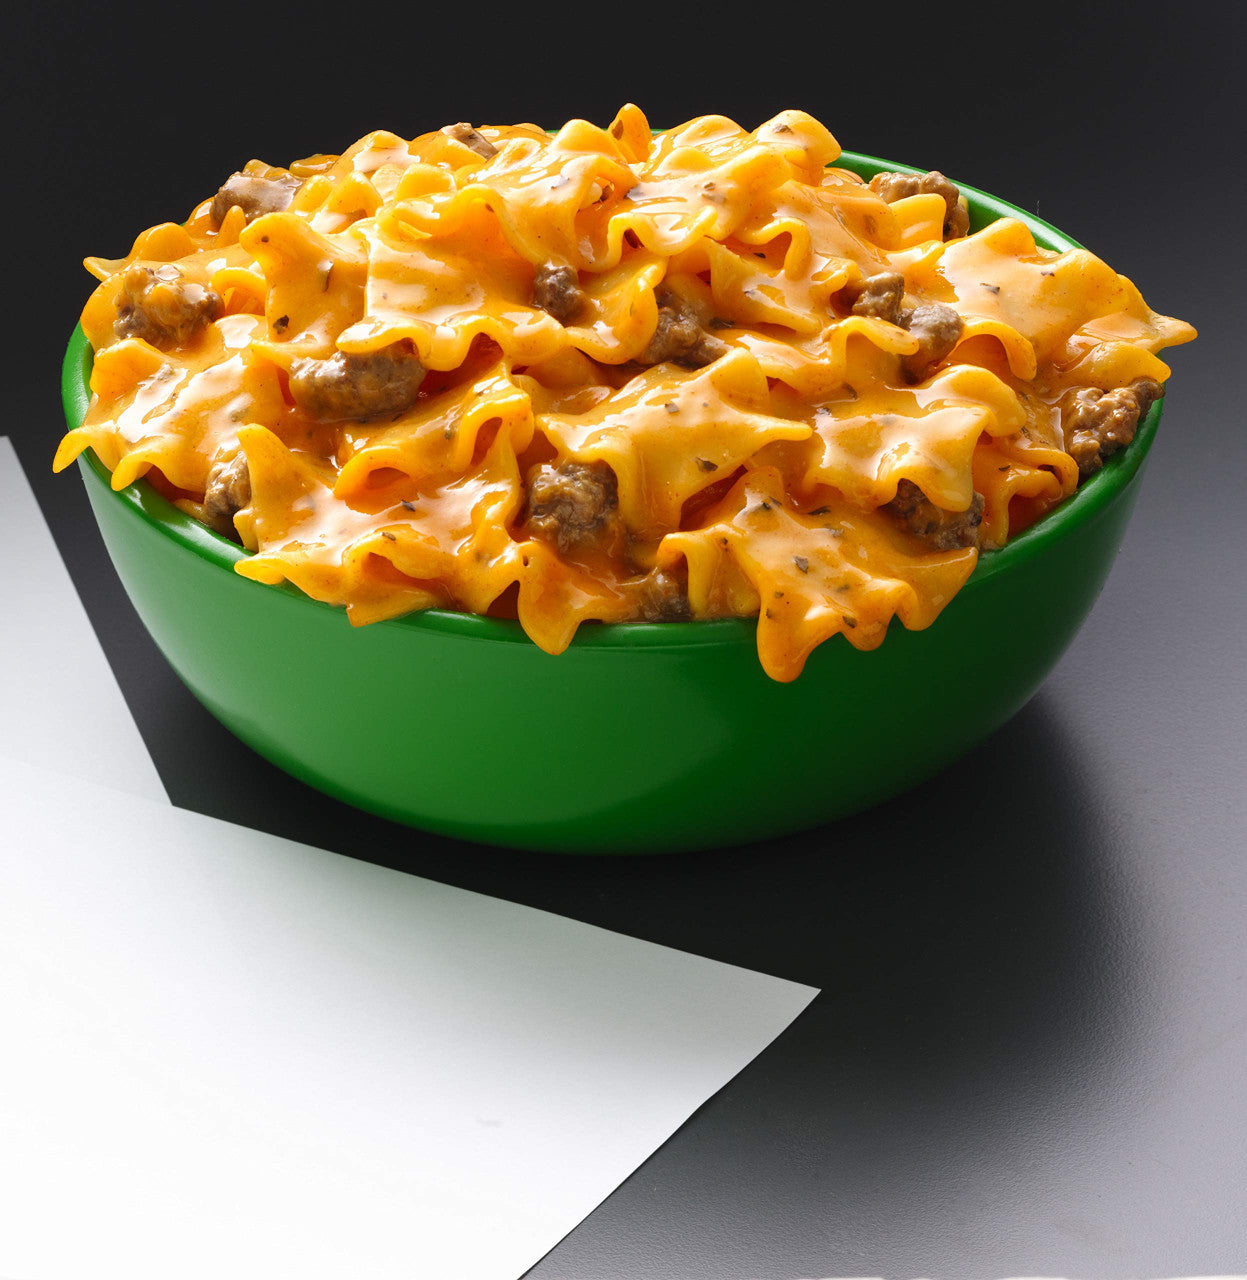 Hamburger Helper, Four Cheese, Lasagne, 193g/6.8oz., {Imported from ...